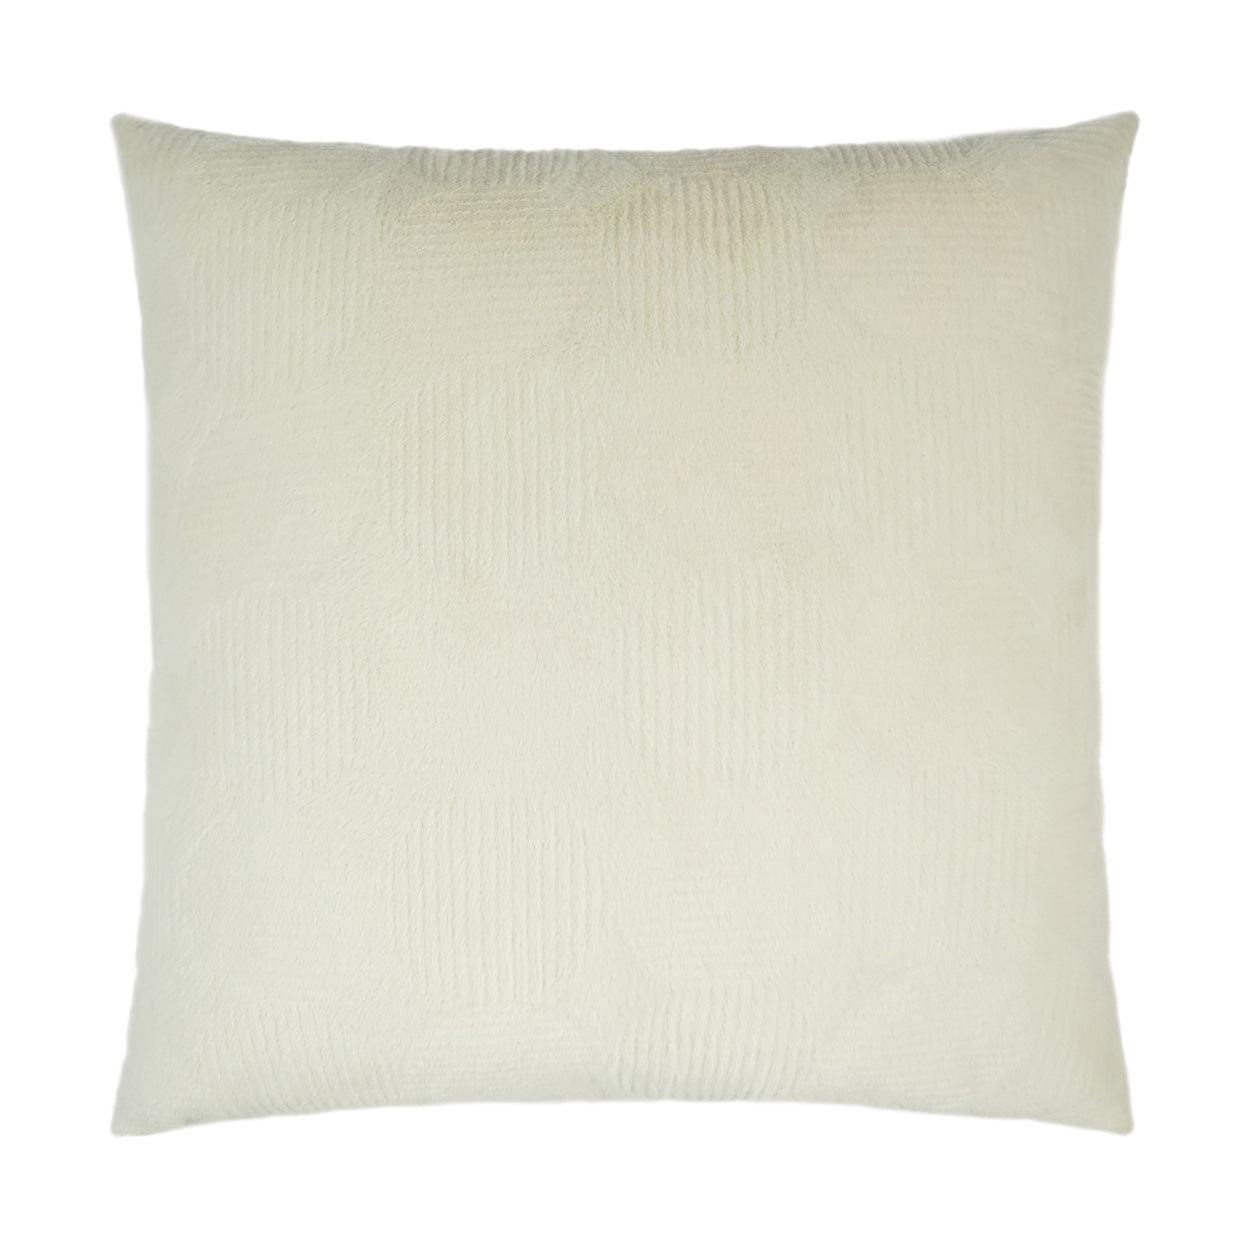 Angelou Solid Circular Dots Faux Fur Ivory Large Throw Pillow With Insert - Uptown Sebastian